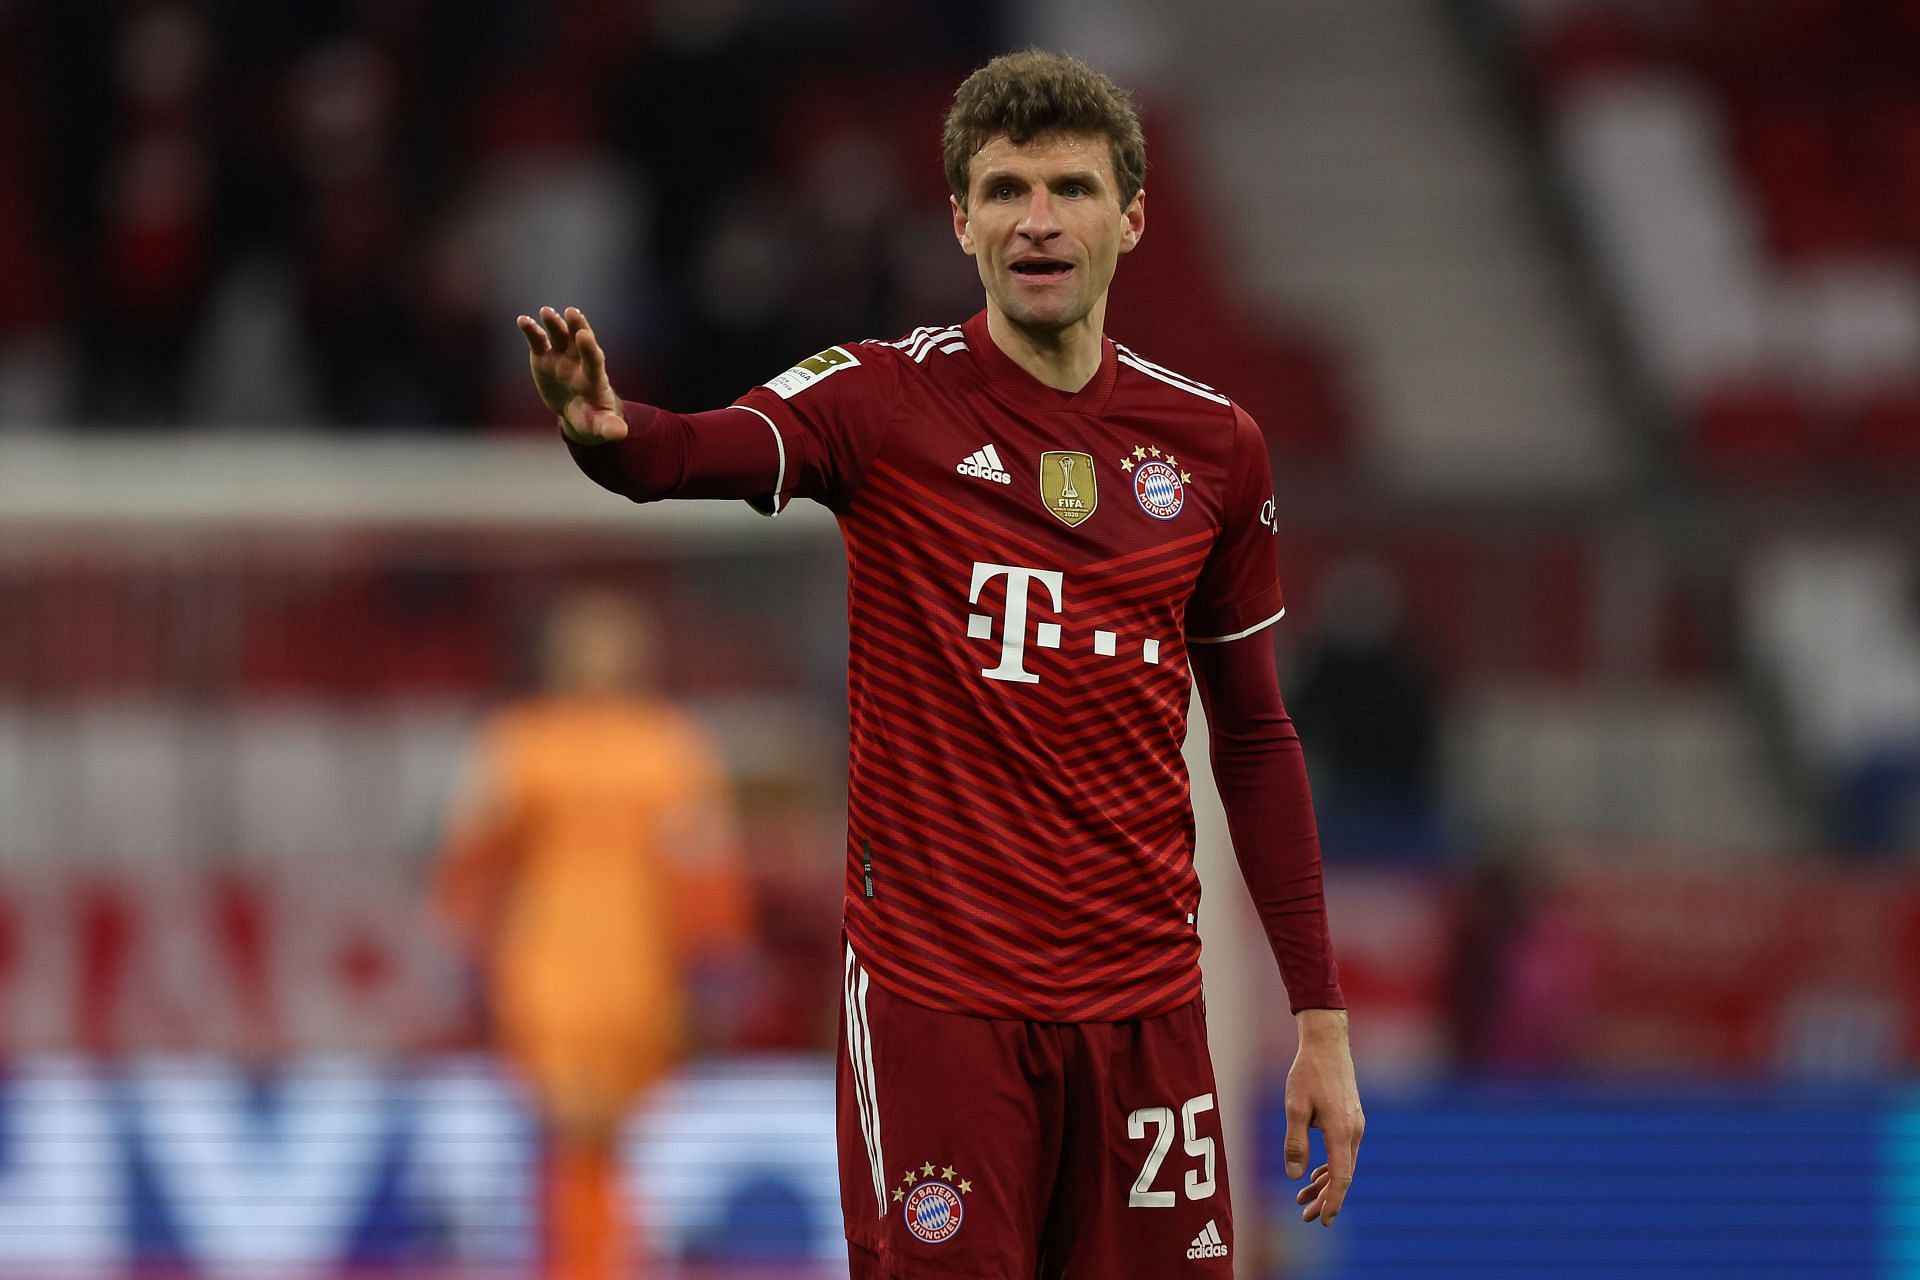 Thomas Muller has been with Bayern Munich since 2008